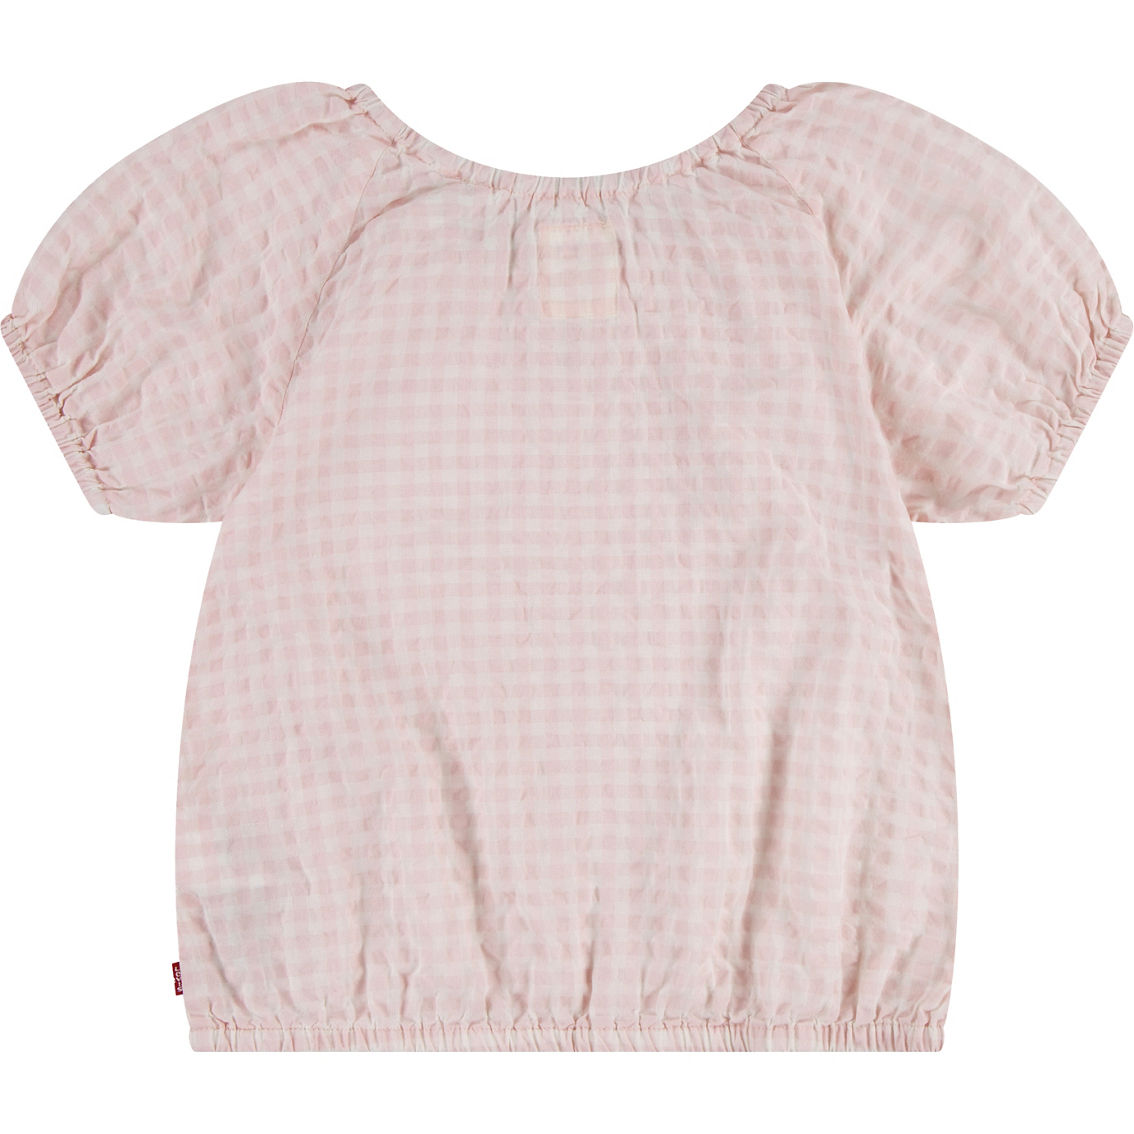 Levi's Girls Gingham Peasant Blouse - Image 2 of 3